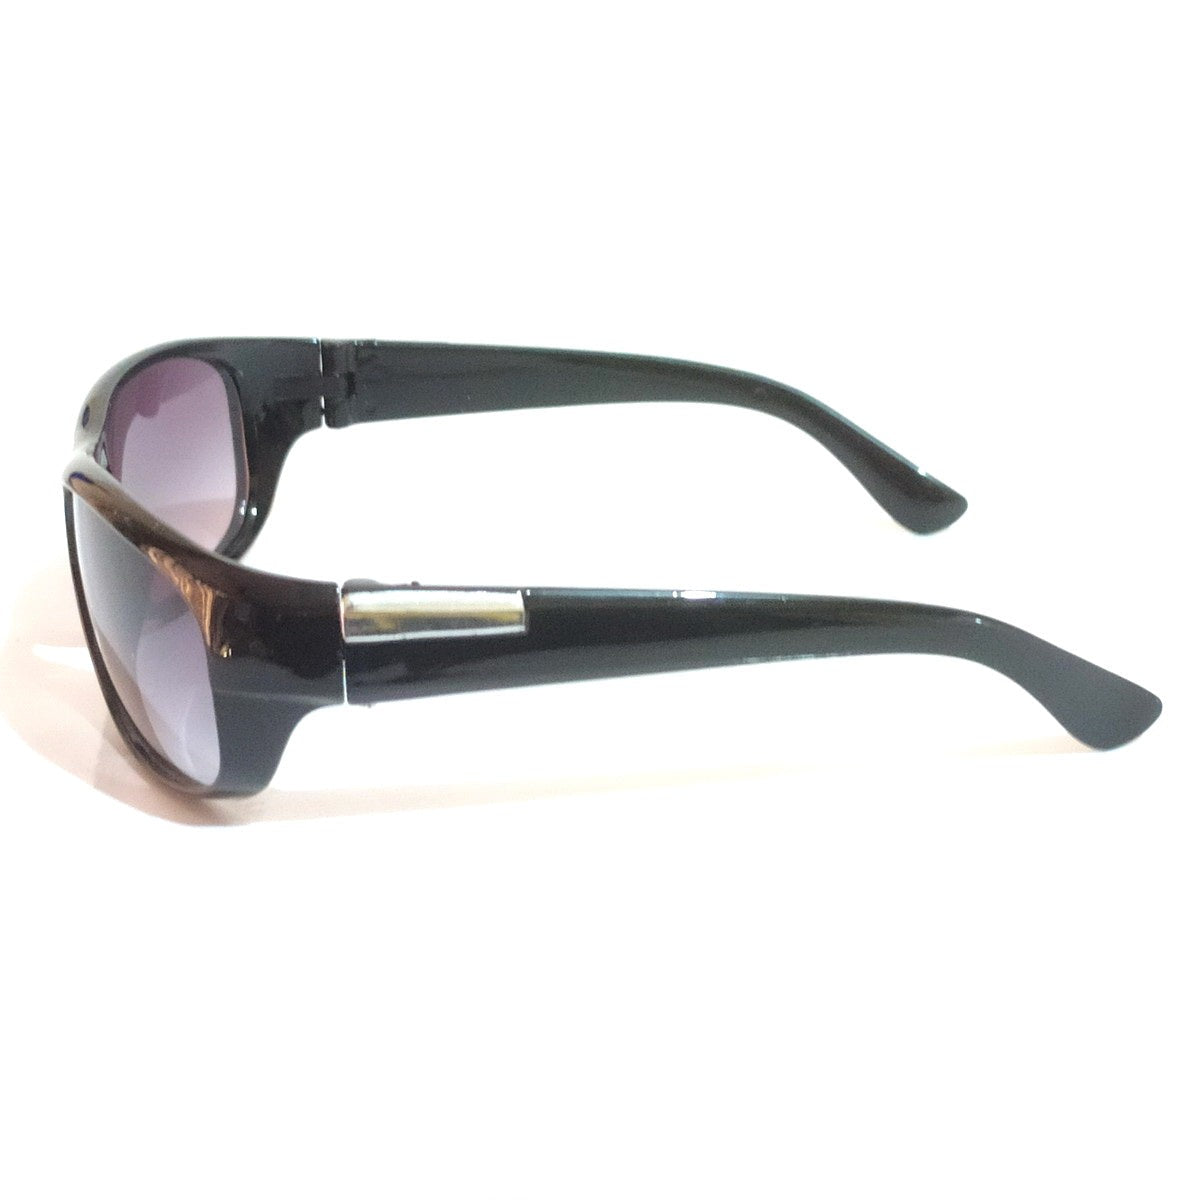 EYESafety Driving Glasses for Men and Women Sunglasses with Grey Lens M05 - Glasses India Online